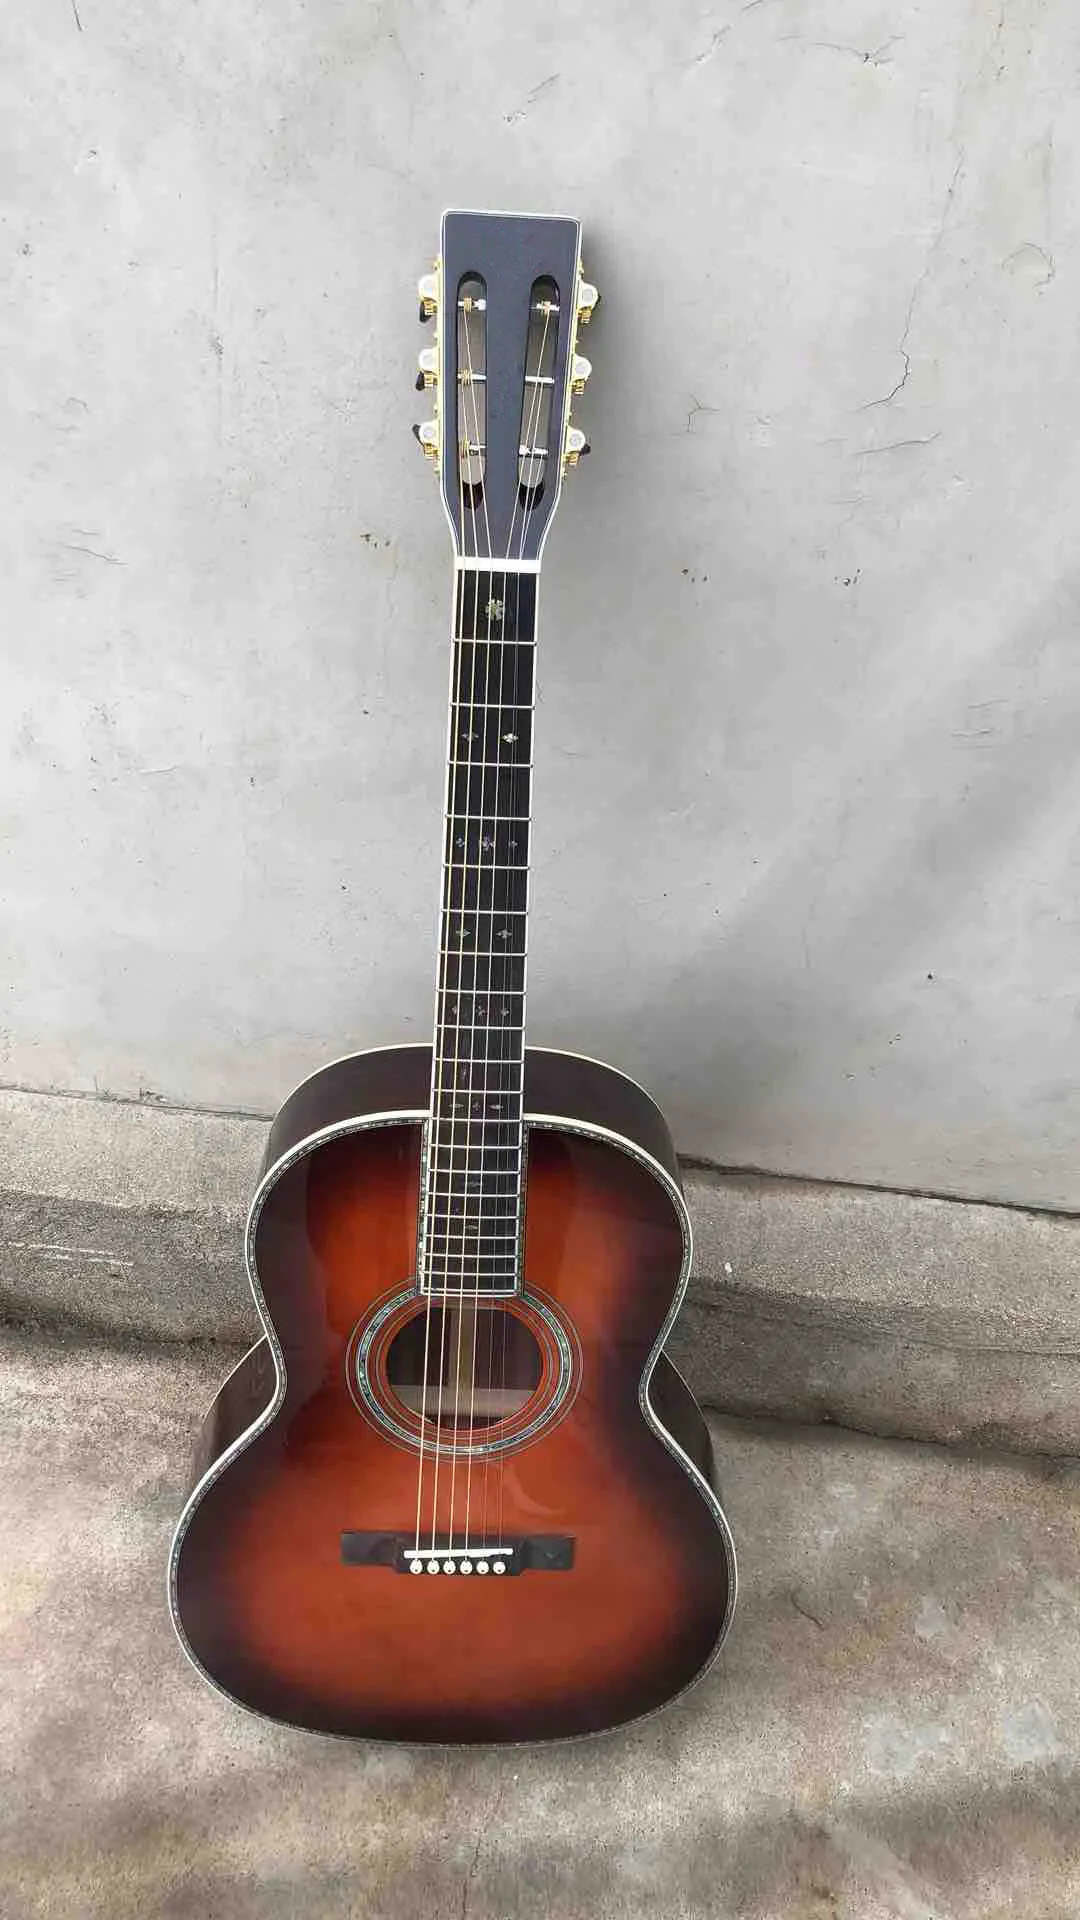 Custom Solid Sitka Spruce Top JM Acoustic Guitar Abalone Binding Inlay Rosewood Fingerboard customize logo headstock is ok